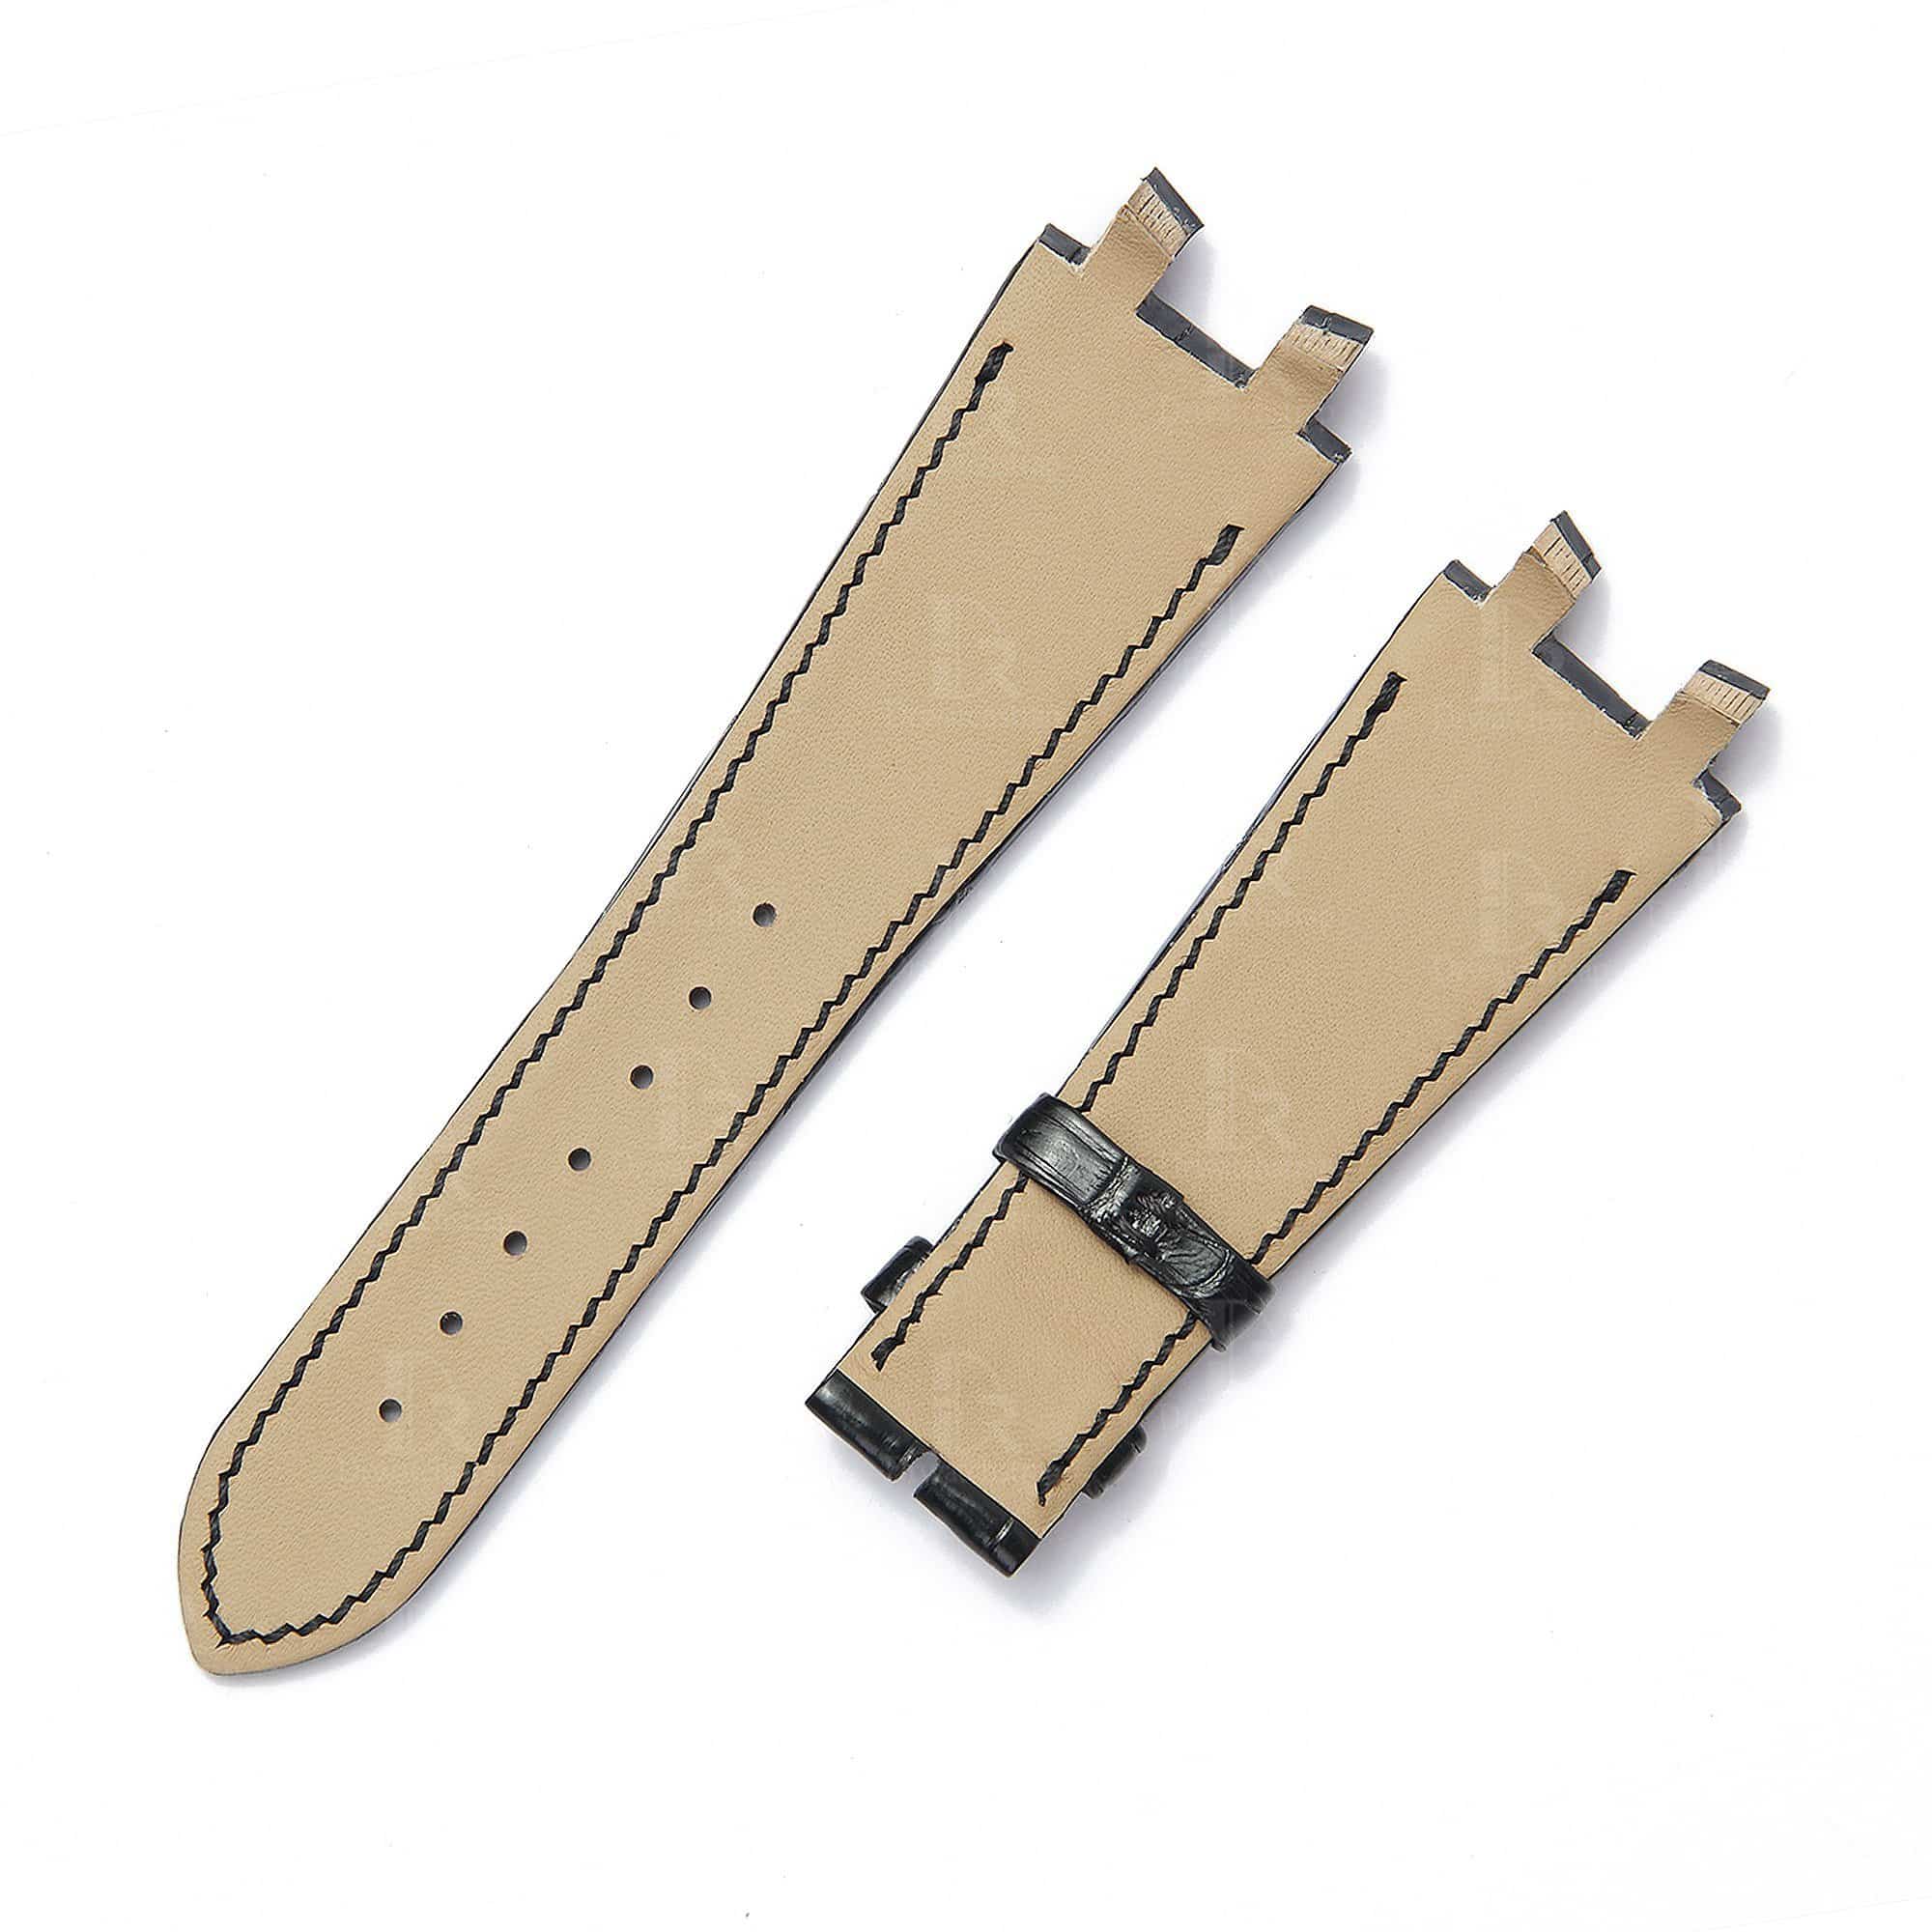 Buy replacement Ulysse Nardin Executive watch strap for sale black alligator